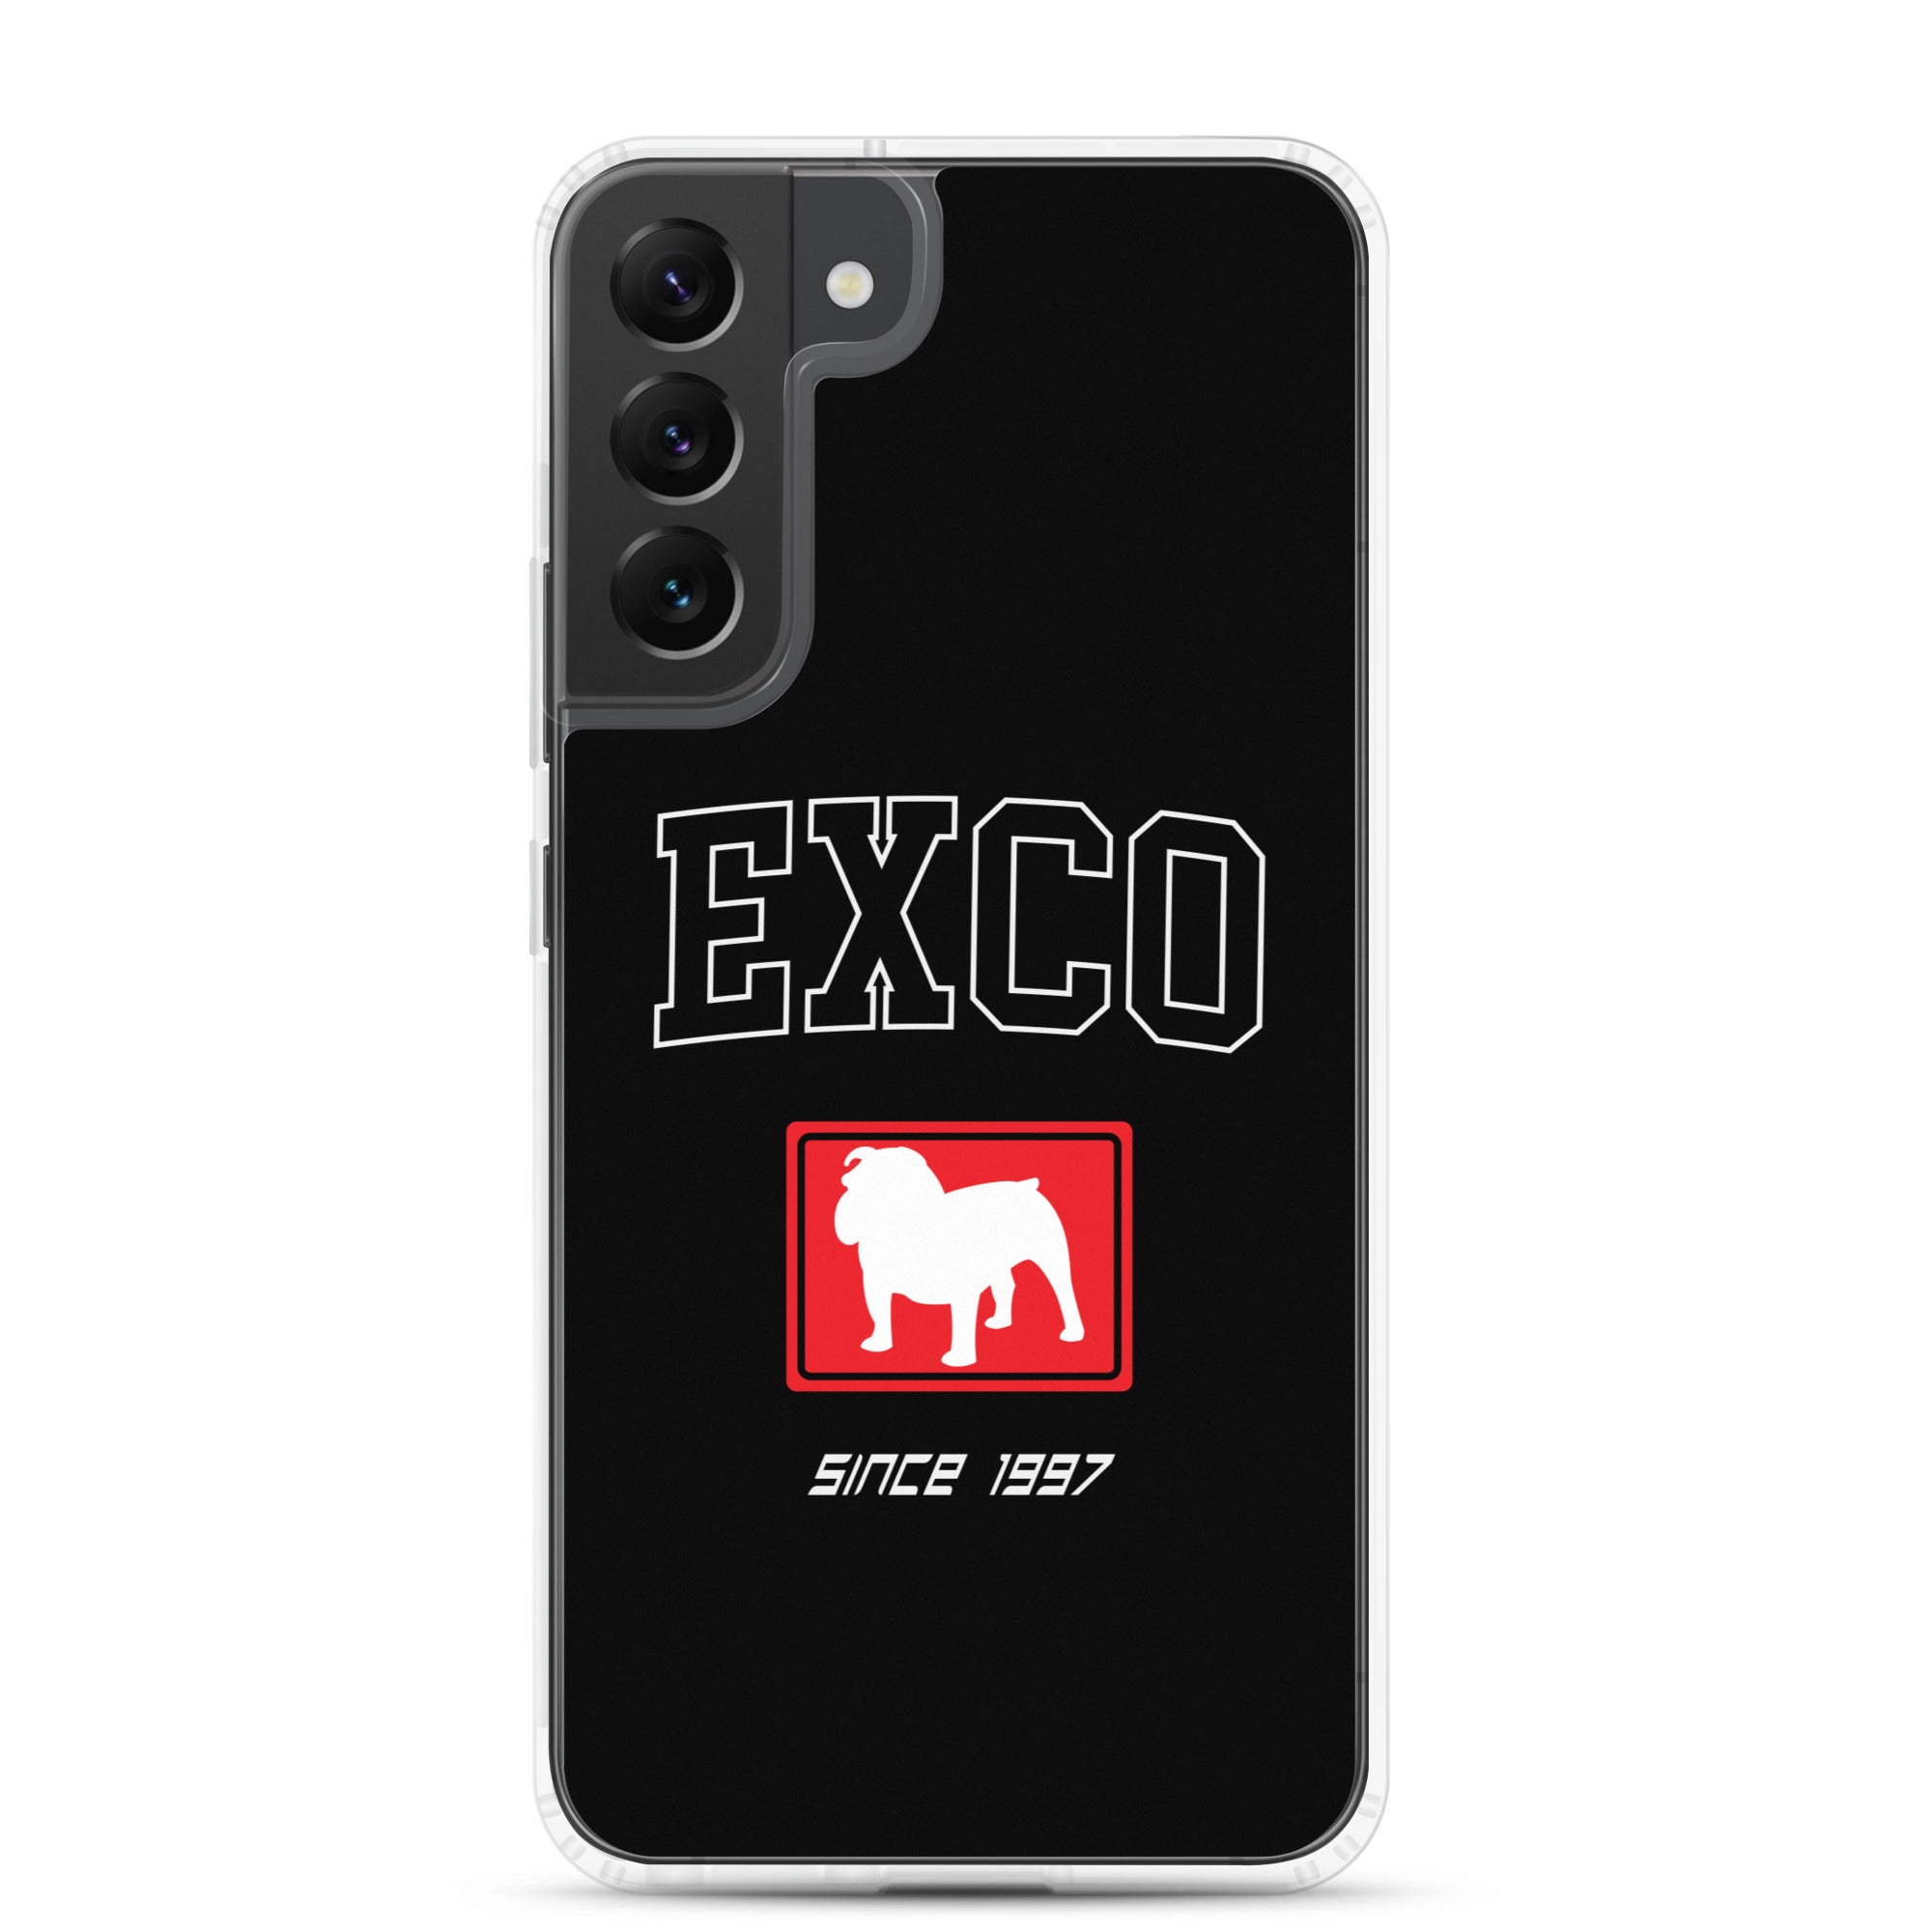 Samsung®用Excoレトロケース – Exco Jeans